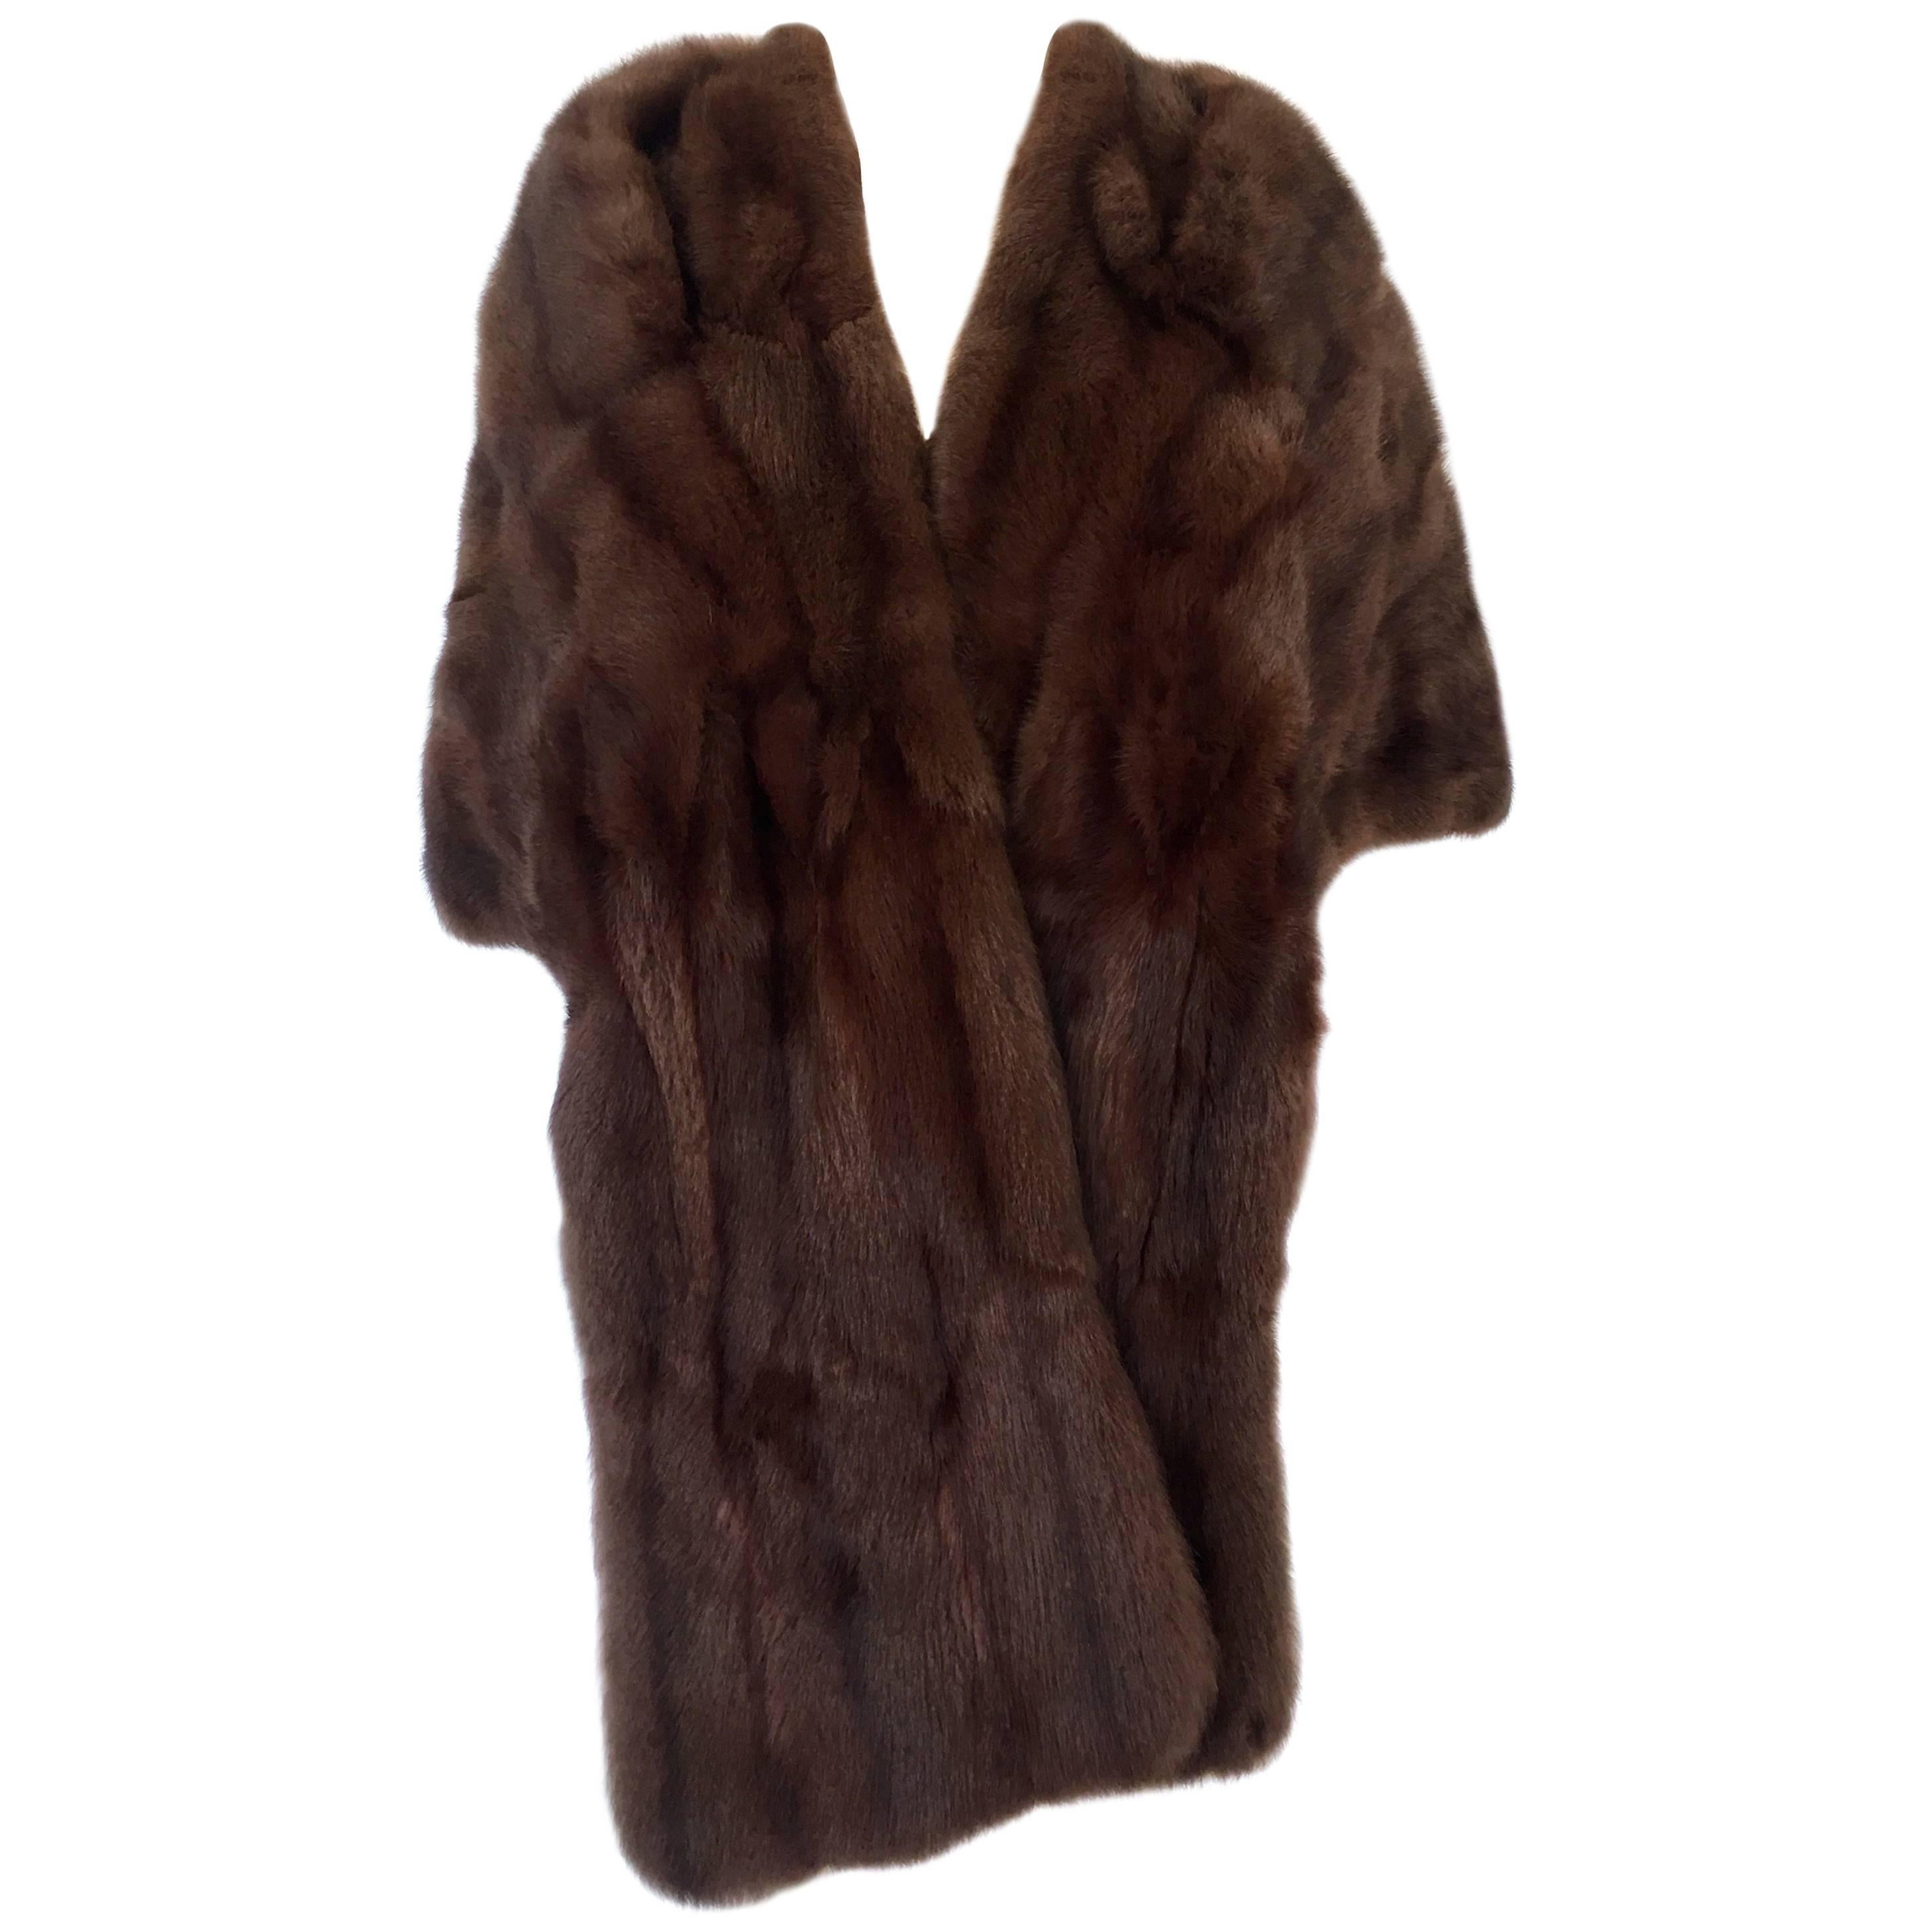 1960'S Chocolate Dyed Rabbit Fur Stole-Capelet